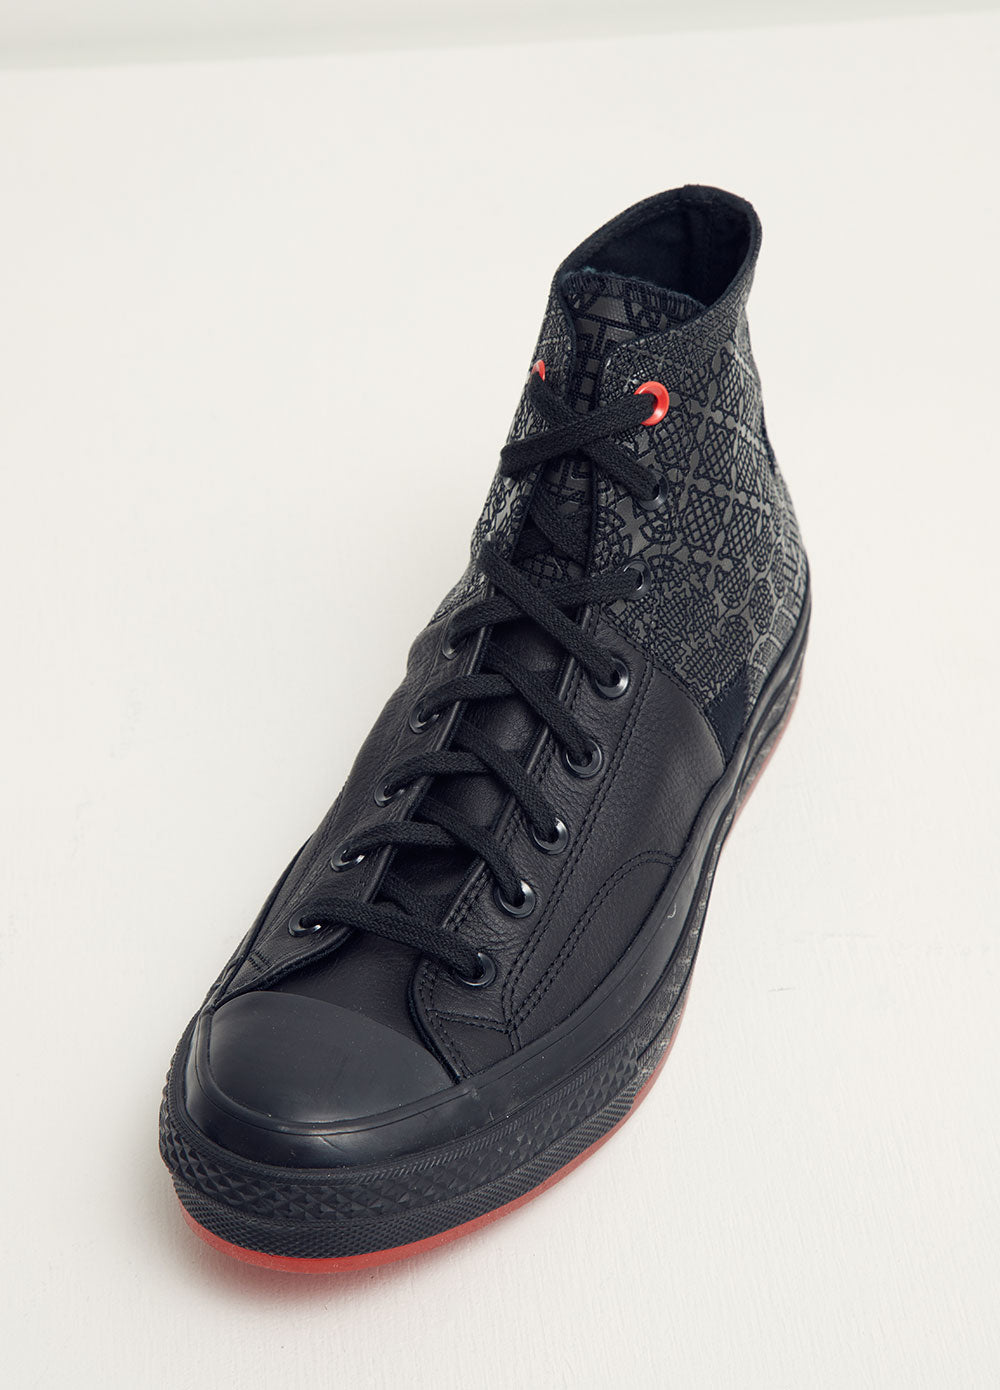 Chinese New Year - Chuck Taylor 70 High Top Sneakers